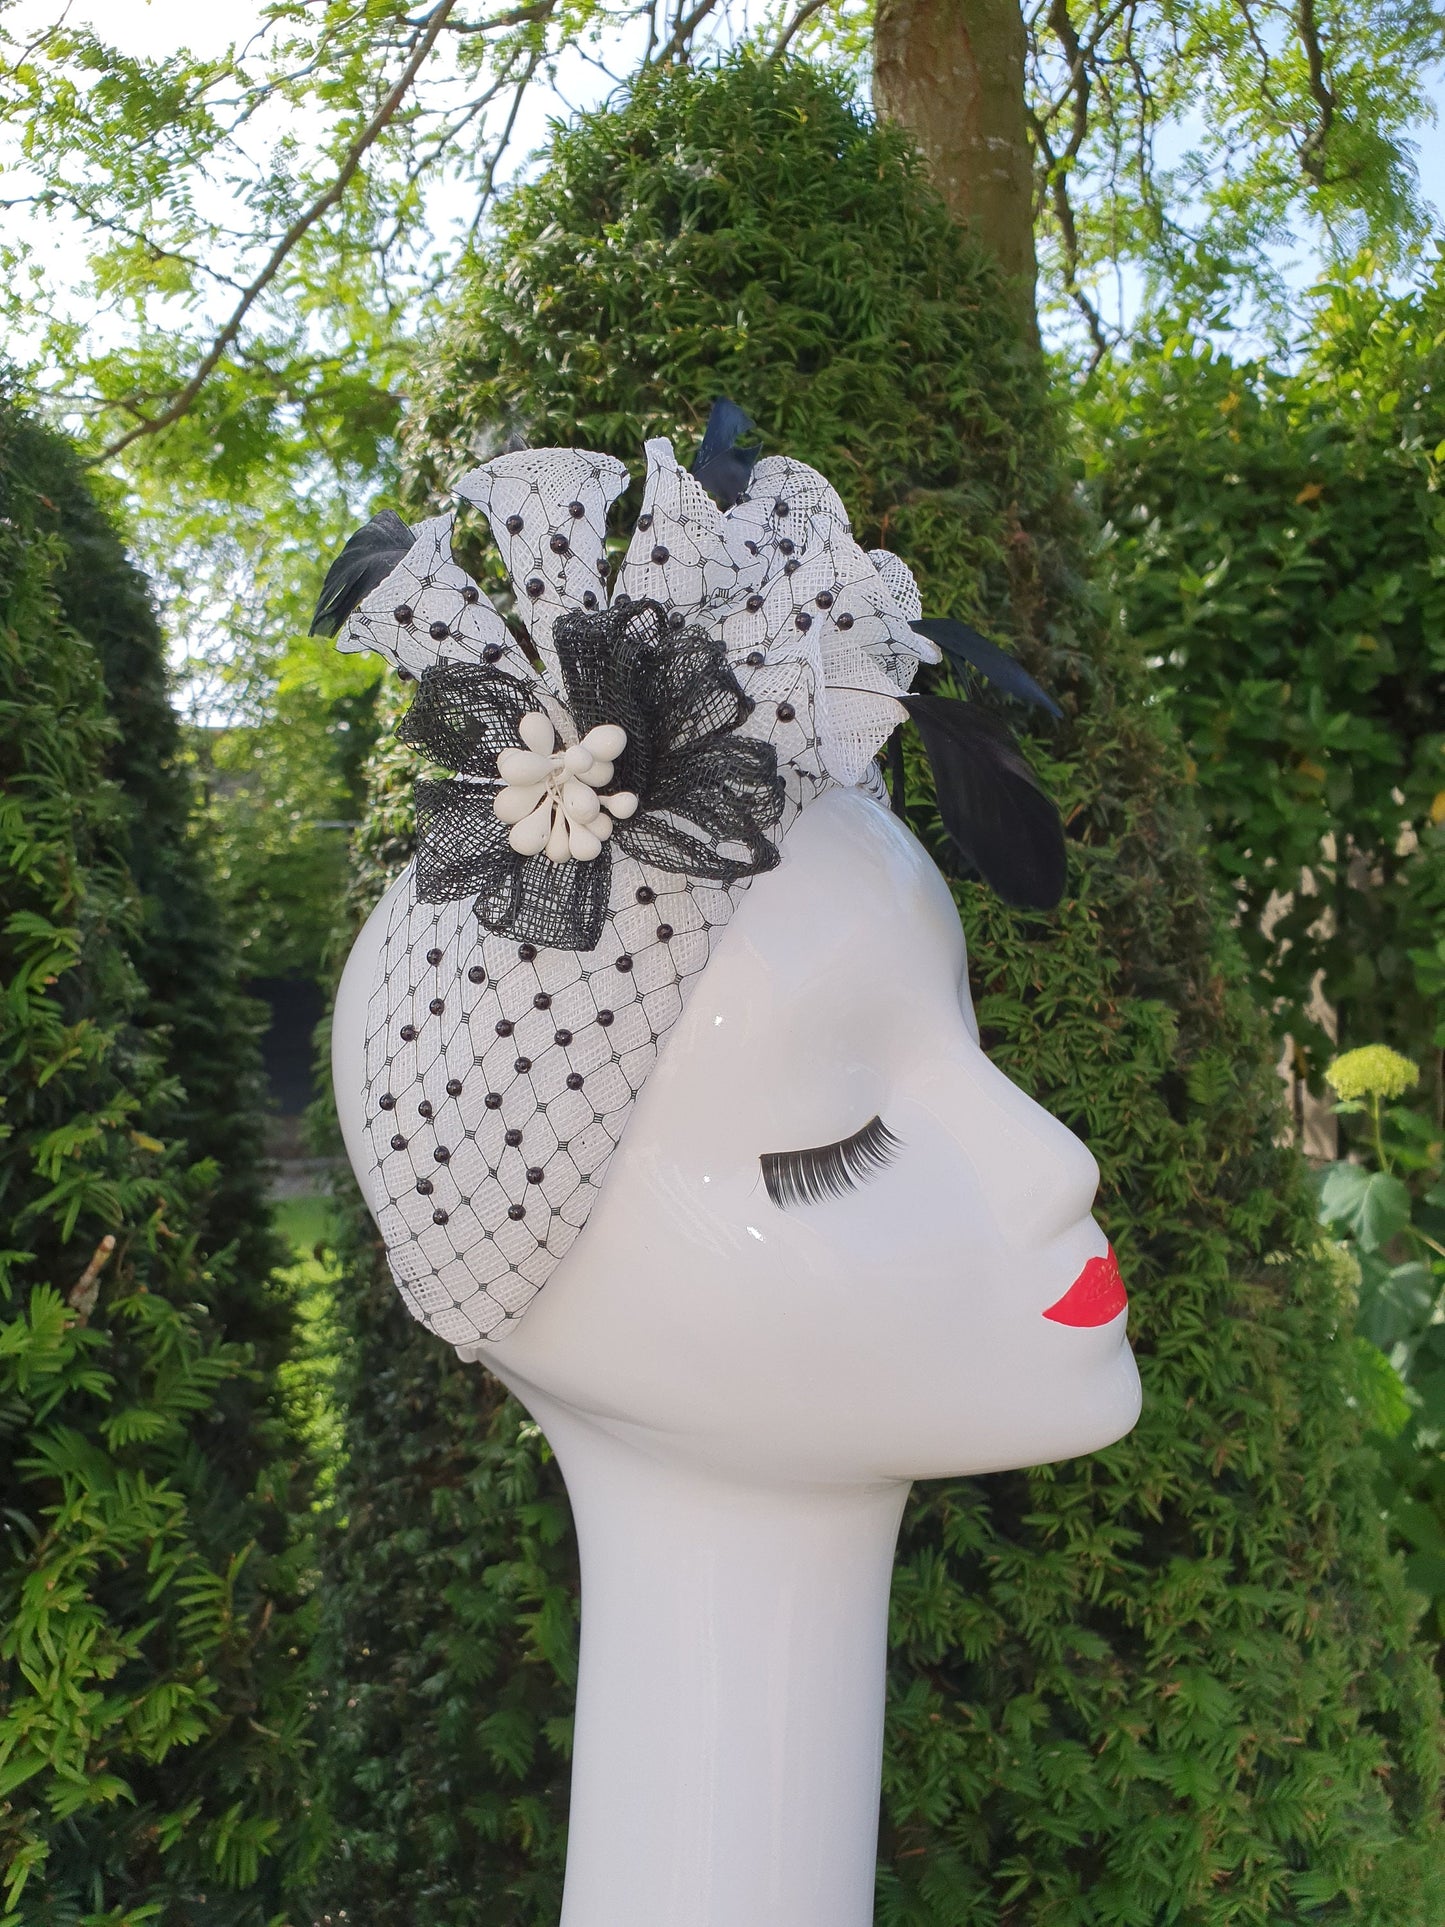 Elegant Handmade Hairband Diadem - Black and White with Feathers and Stamens - Suitable for Special and Formal Occasions